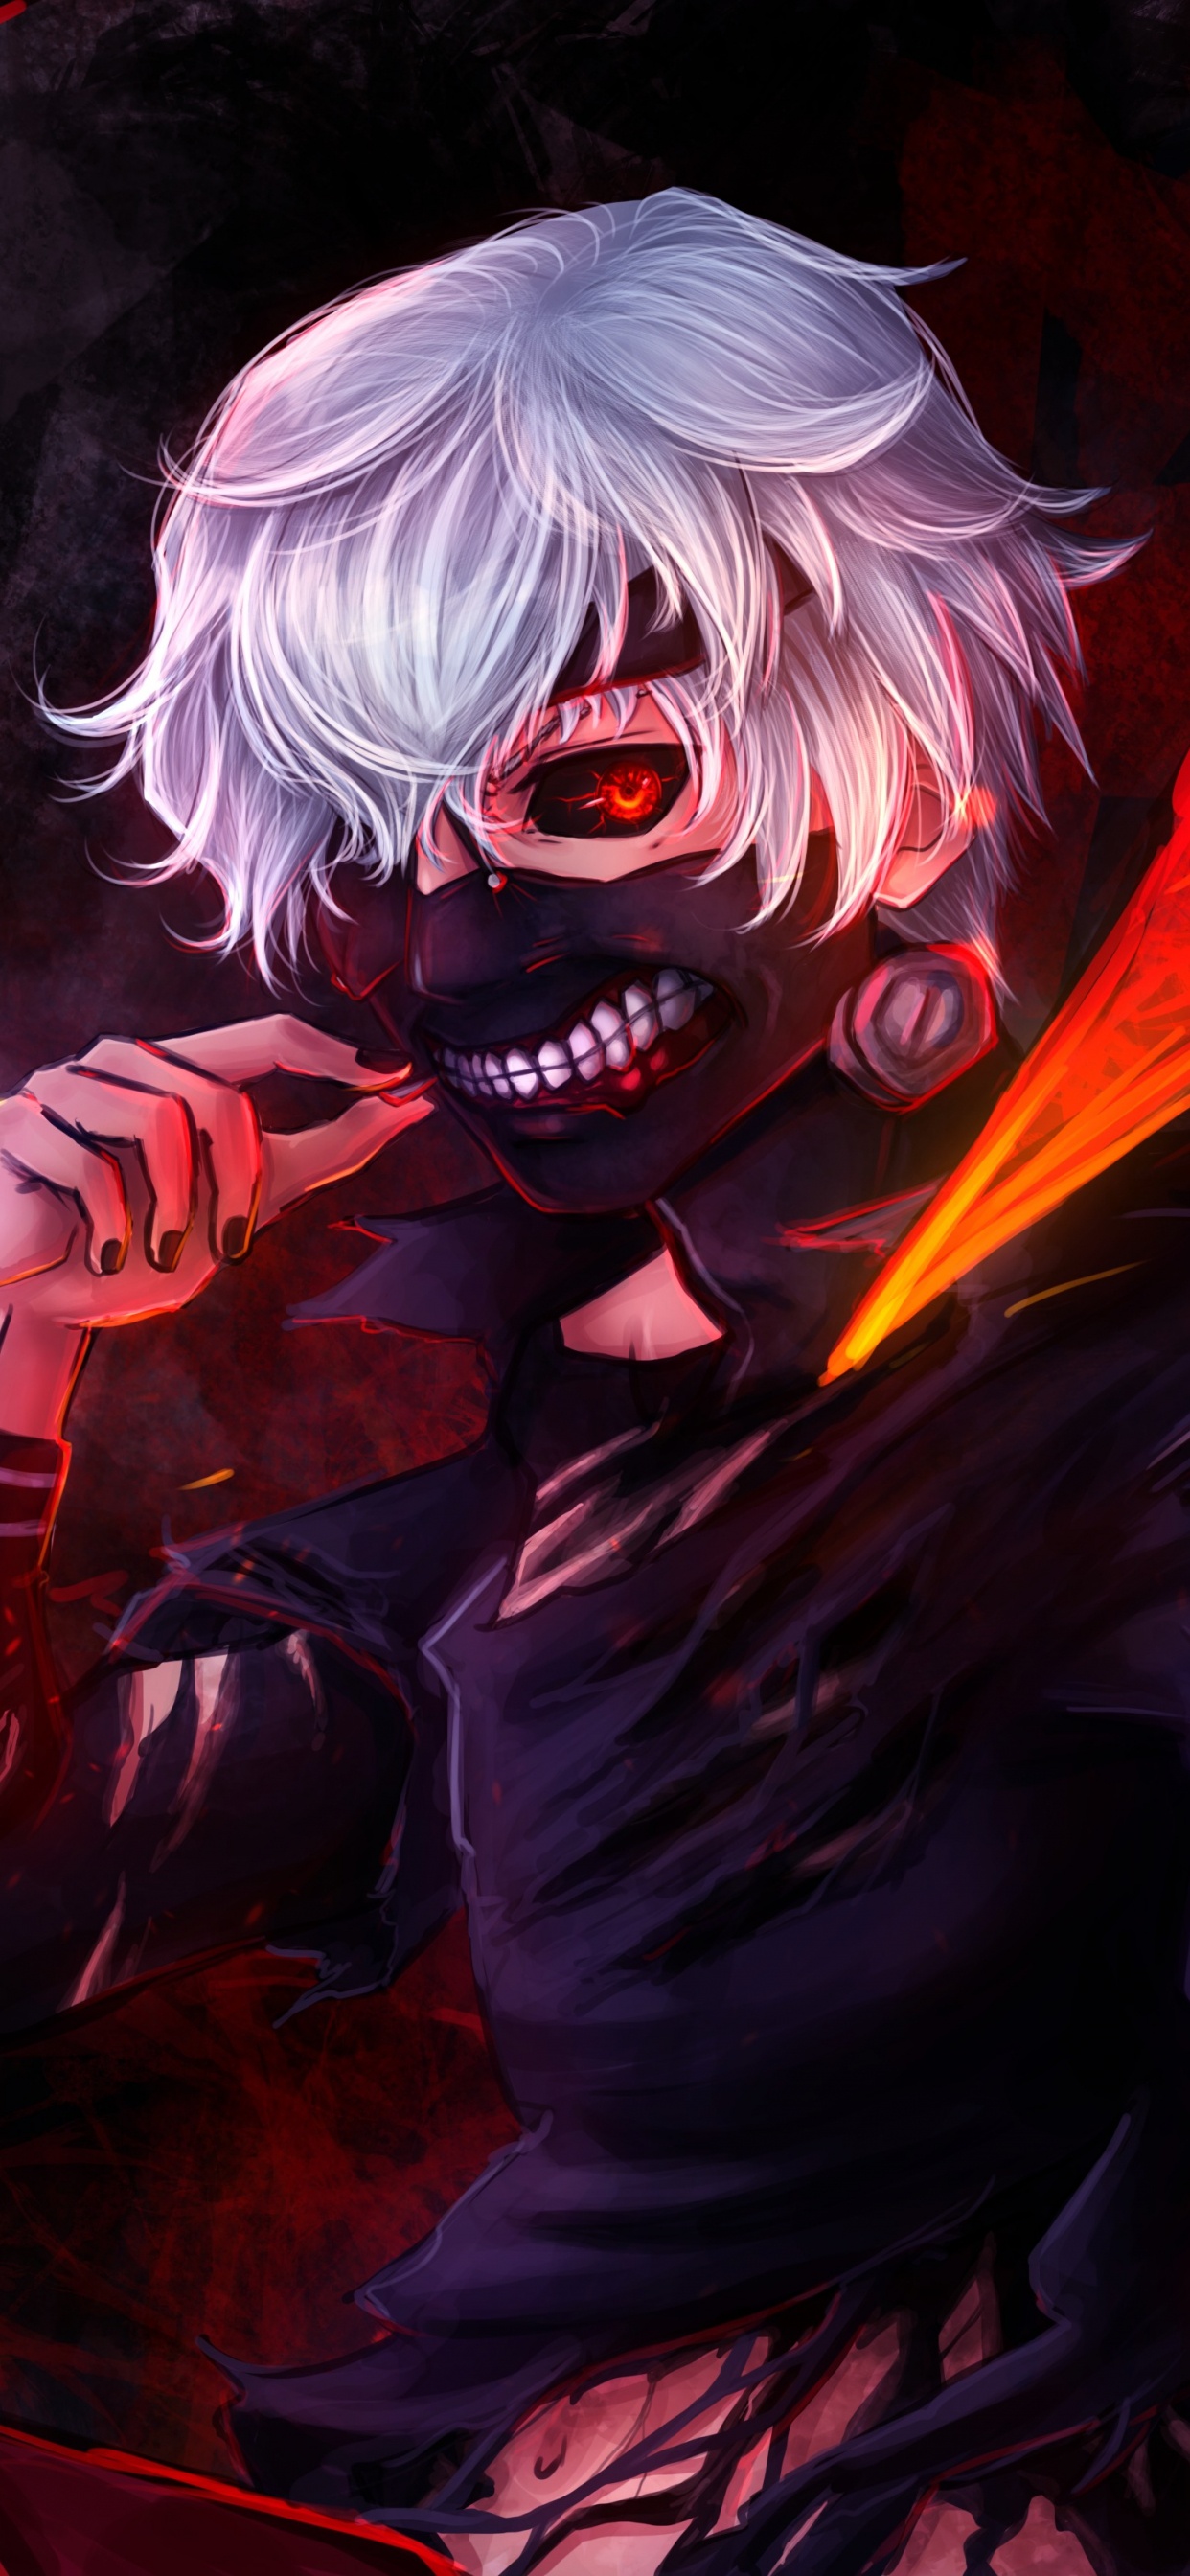 Man in Black and Red Suit Anime Character. Wallpaper in 1242x2688 Resolution